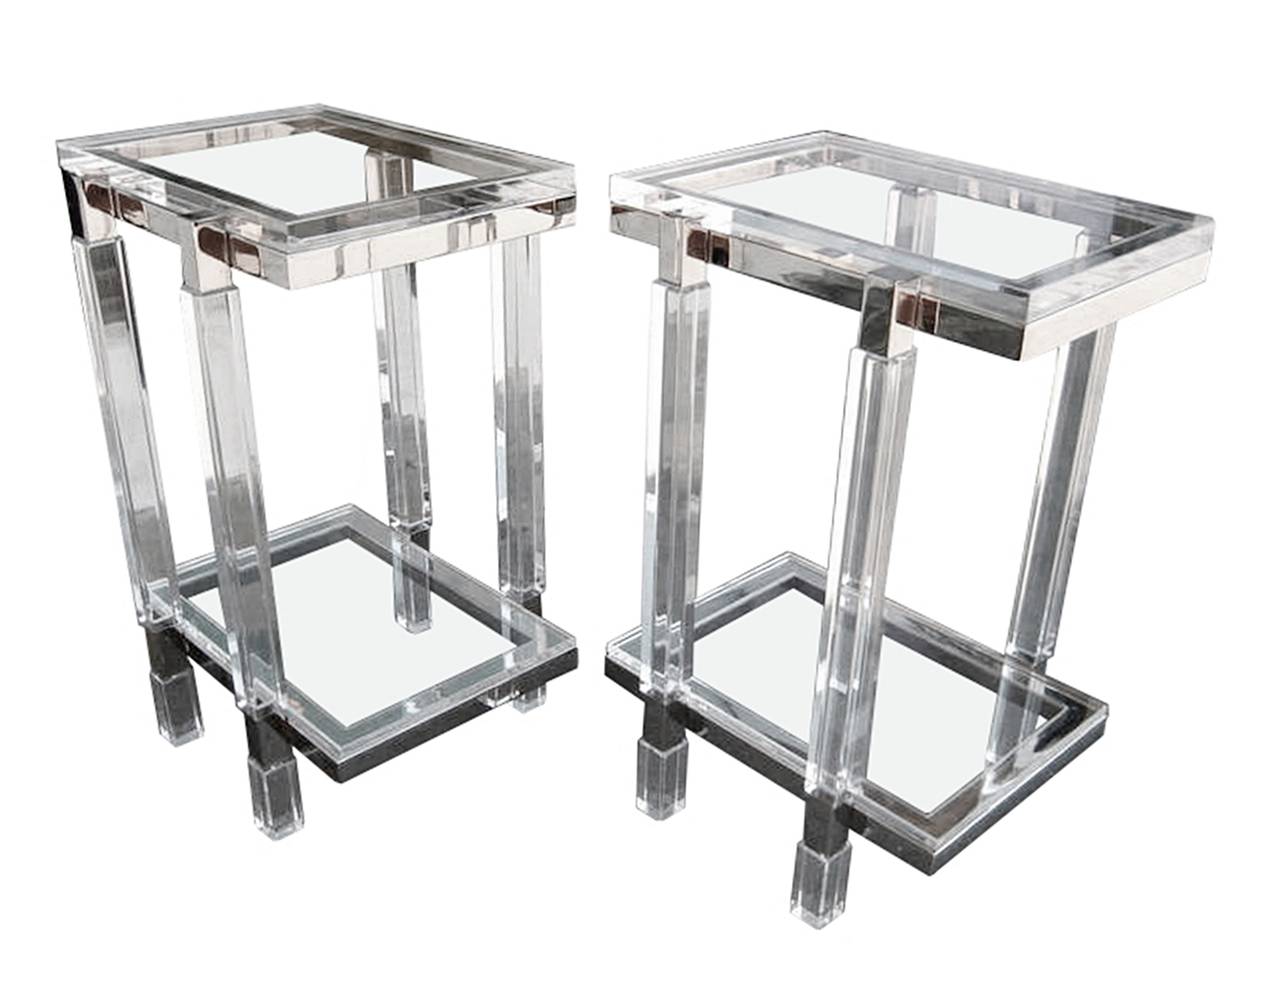 Beautiful set of tall side tables or pedestals in Lucite and nickel by Charles Hollis Jones.

Each table weights about 40 pounds, the metal pieces are made out of 1 1/4